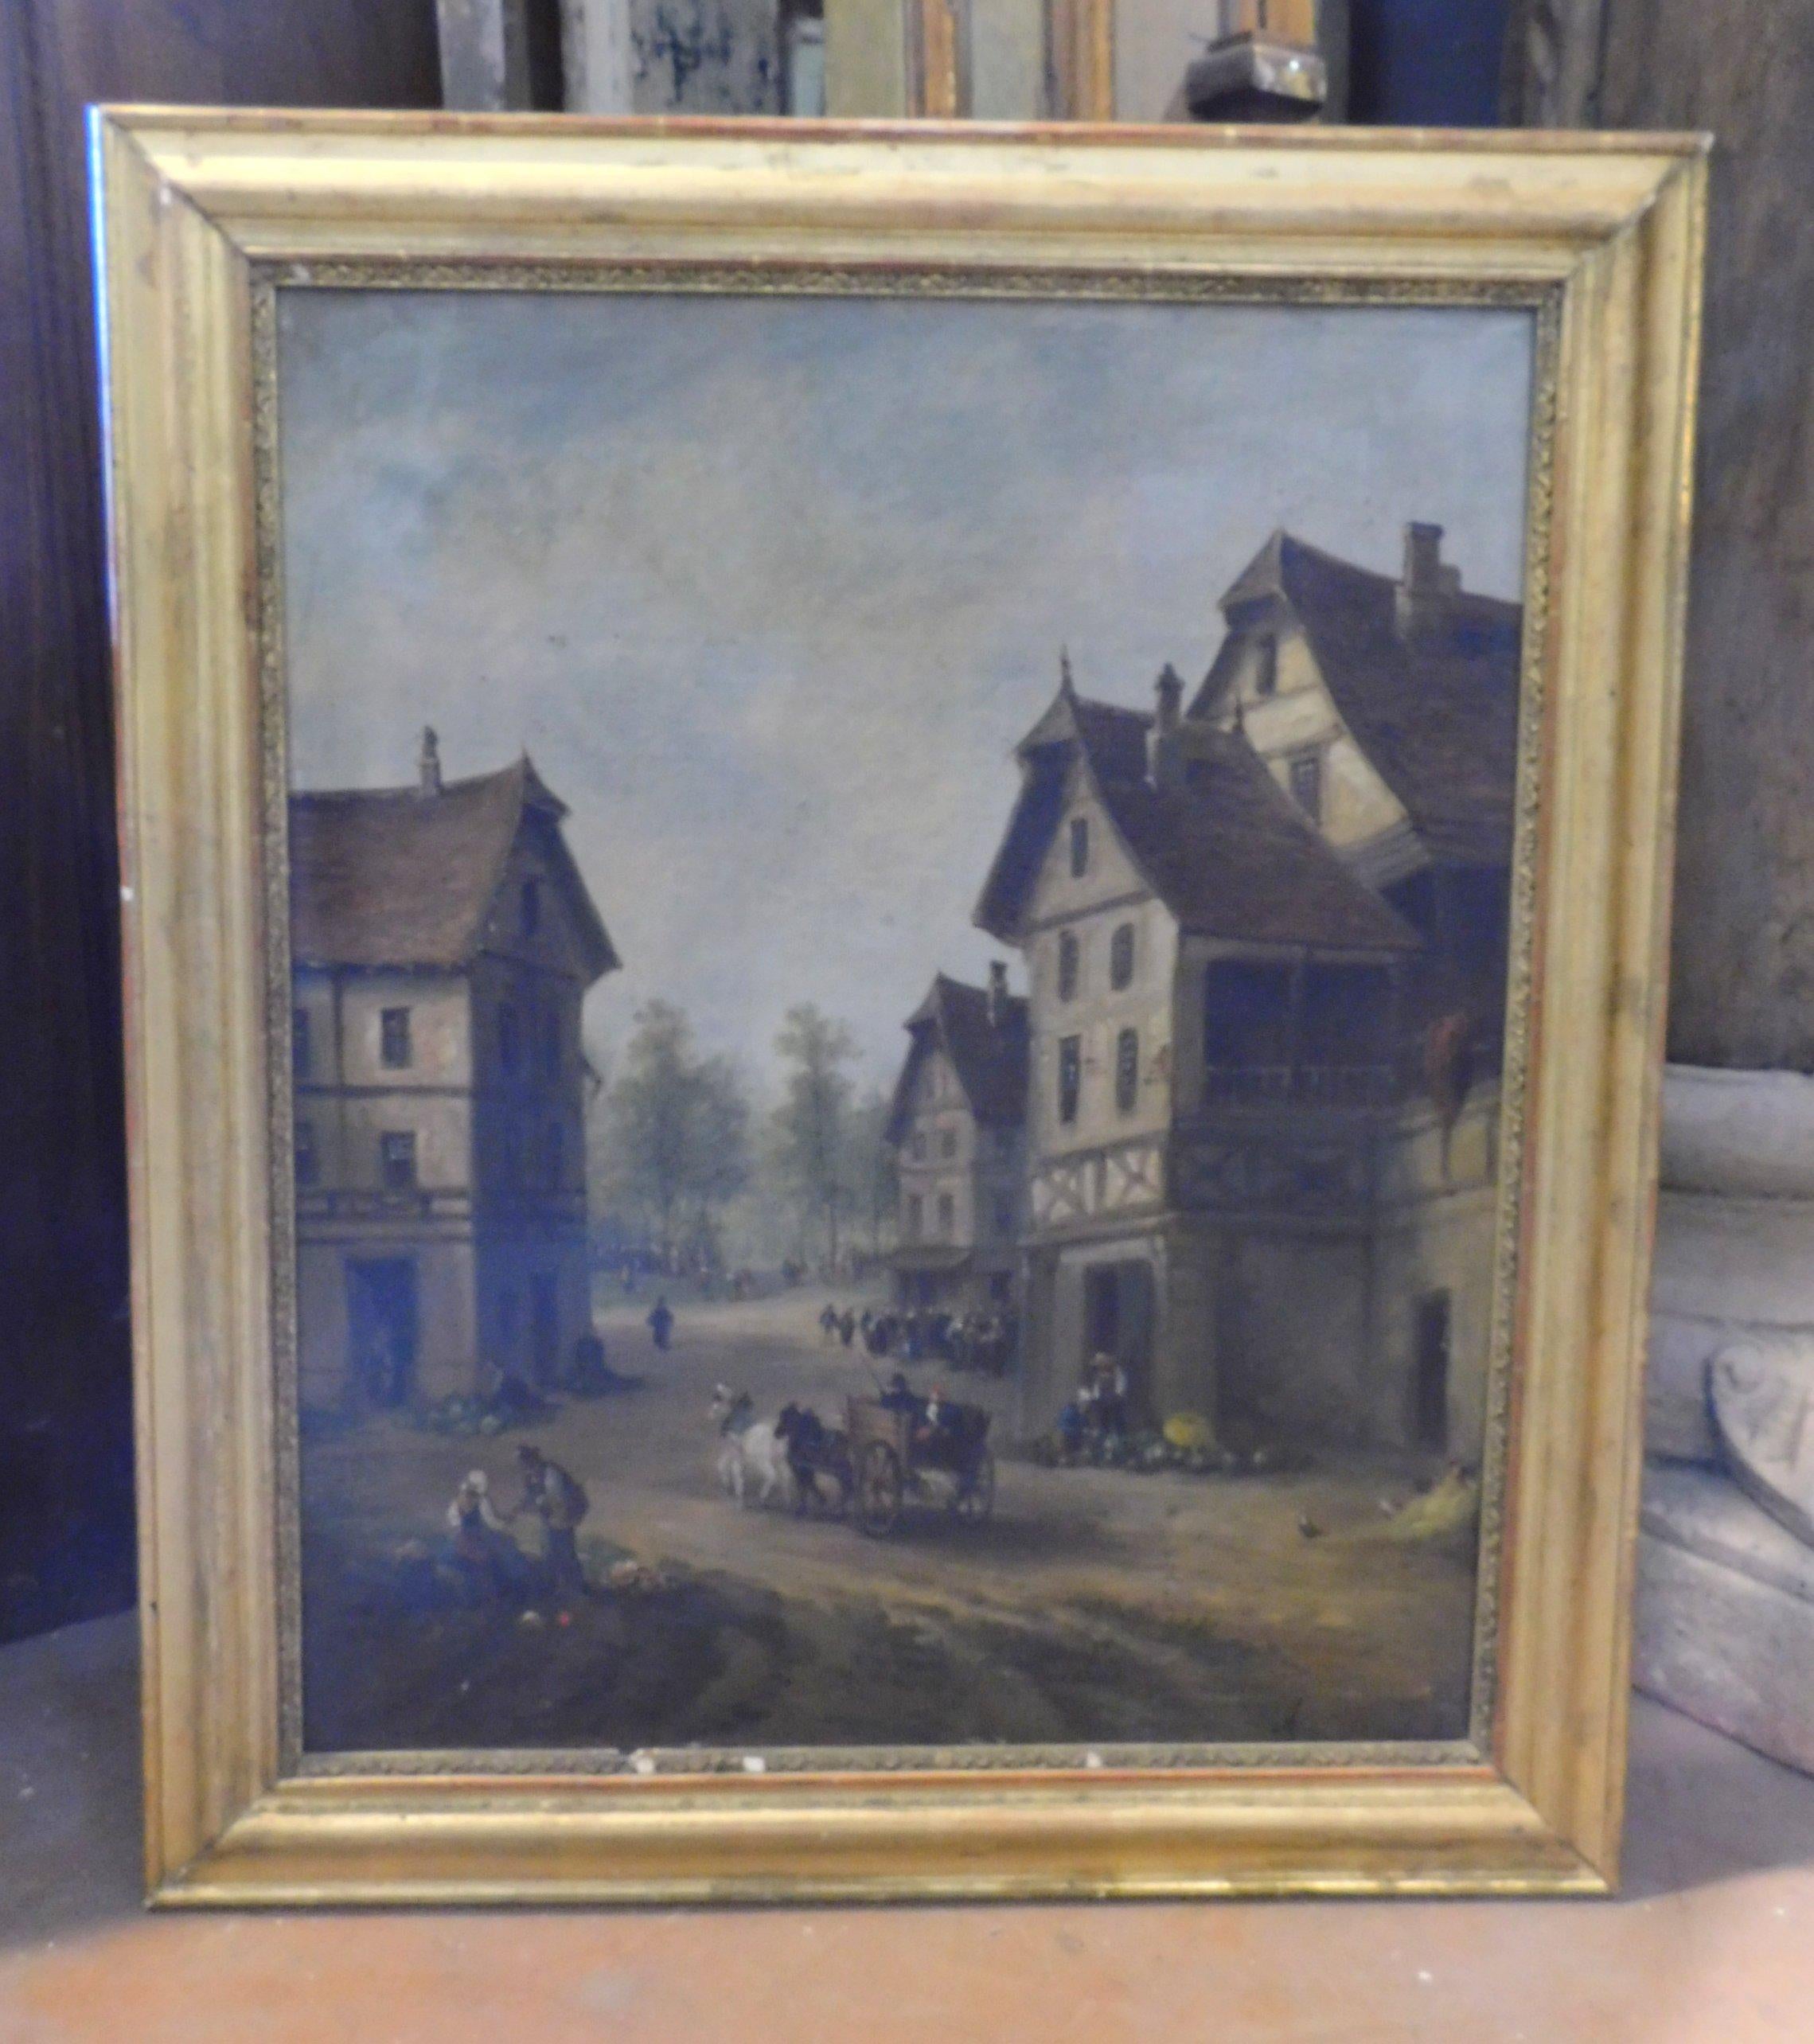 Italian Antique Oil on Canvas Landscape Painting, Gilded Coeval Frame, Late 1800 Italy